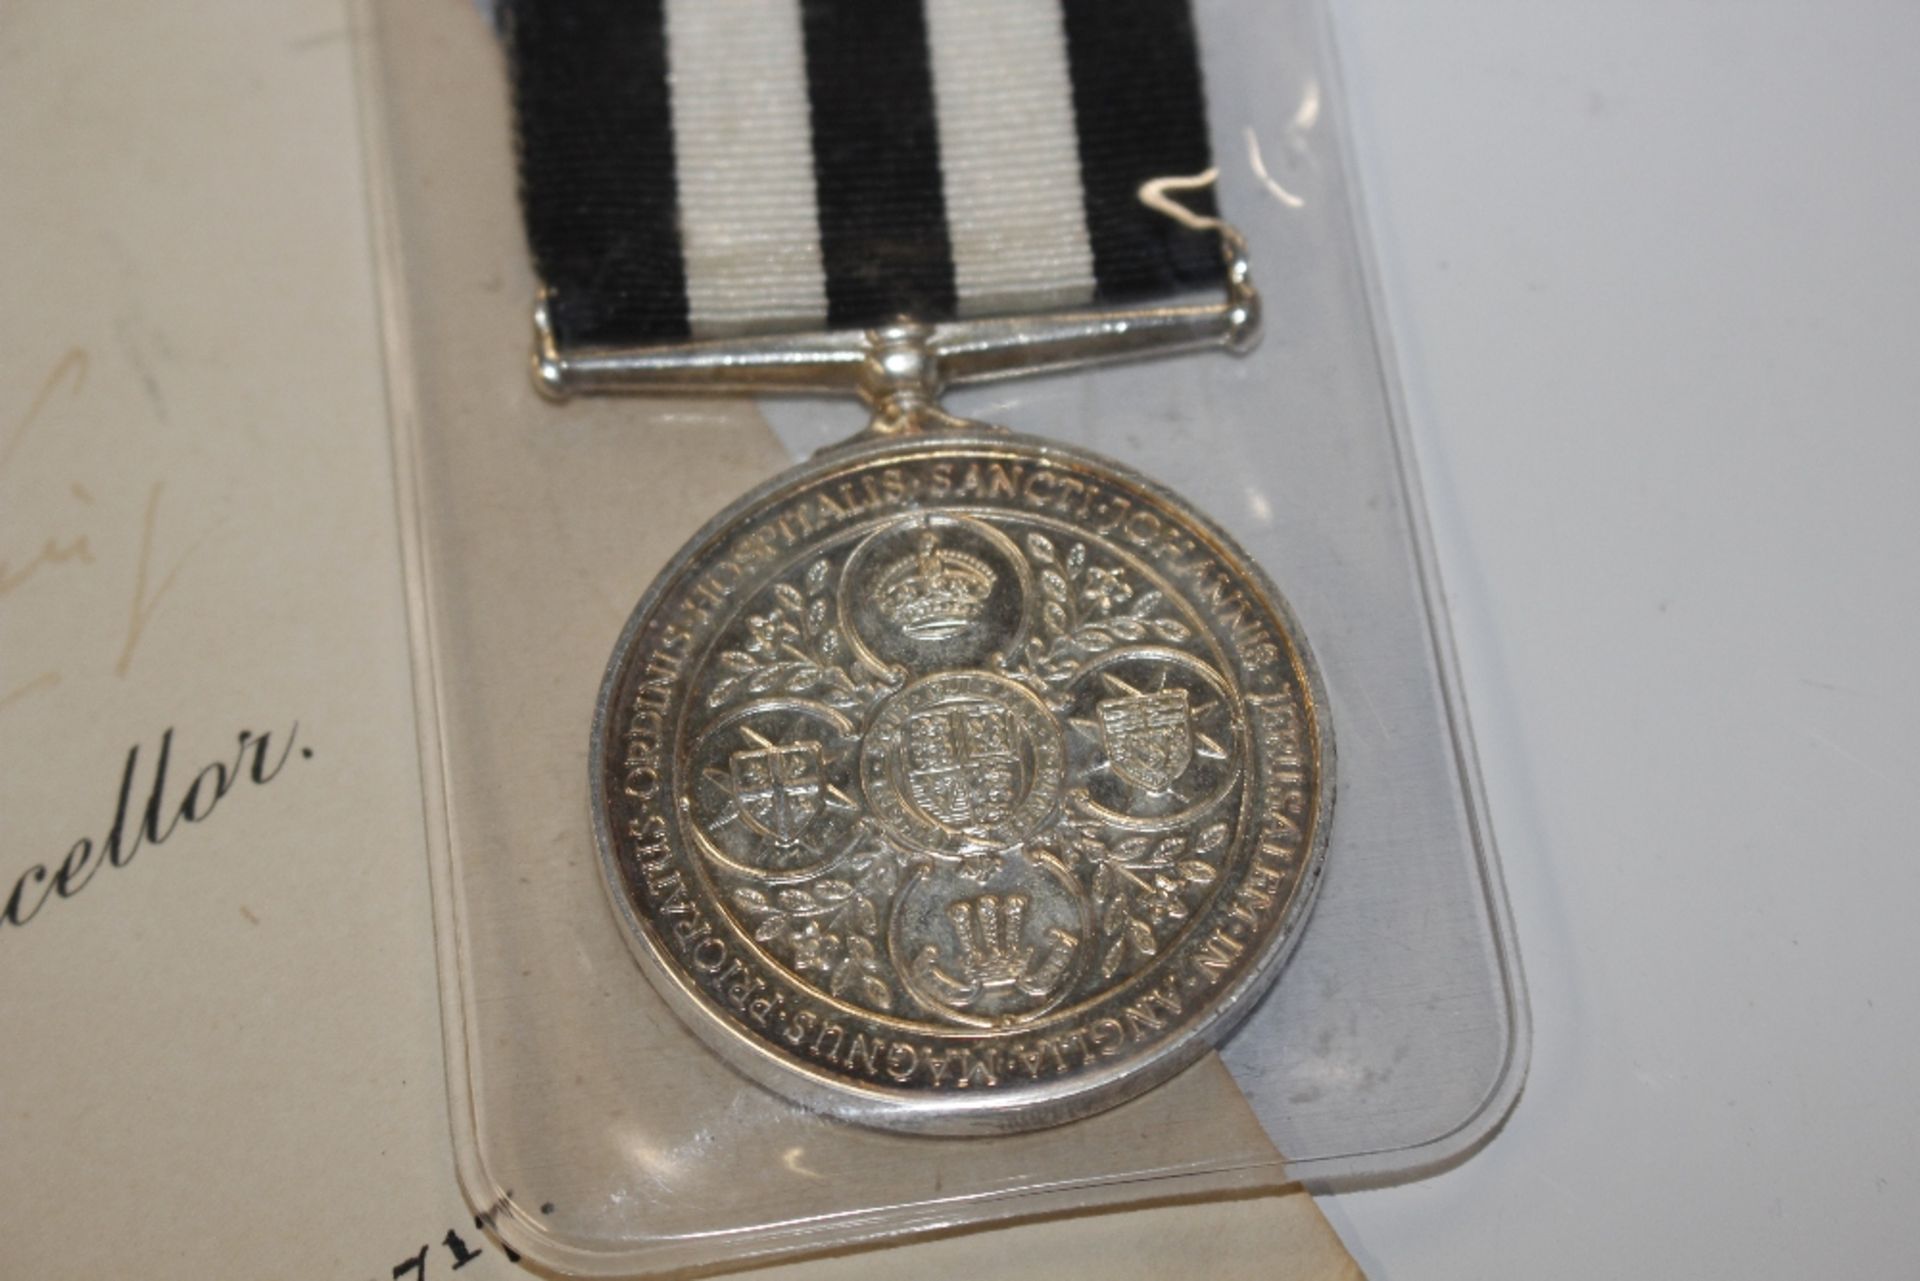 Order of St John's Service medal and scroll to Wal - Image 2 of 3